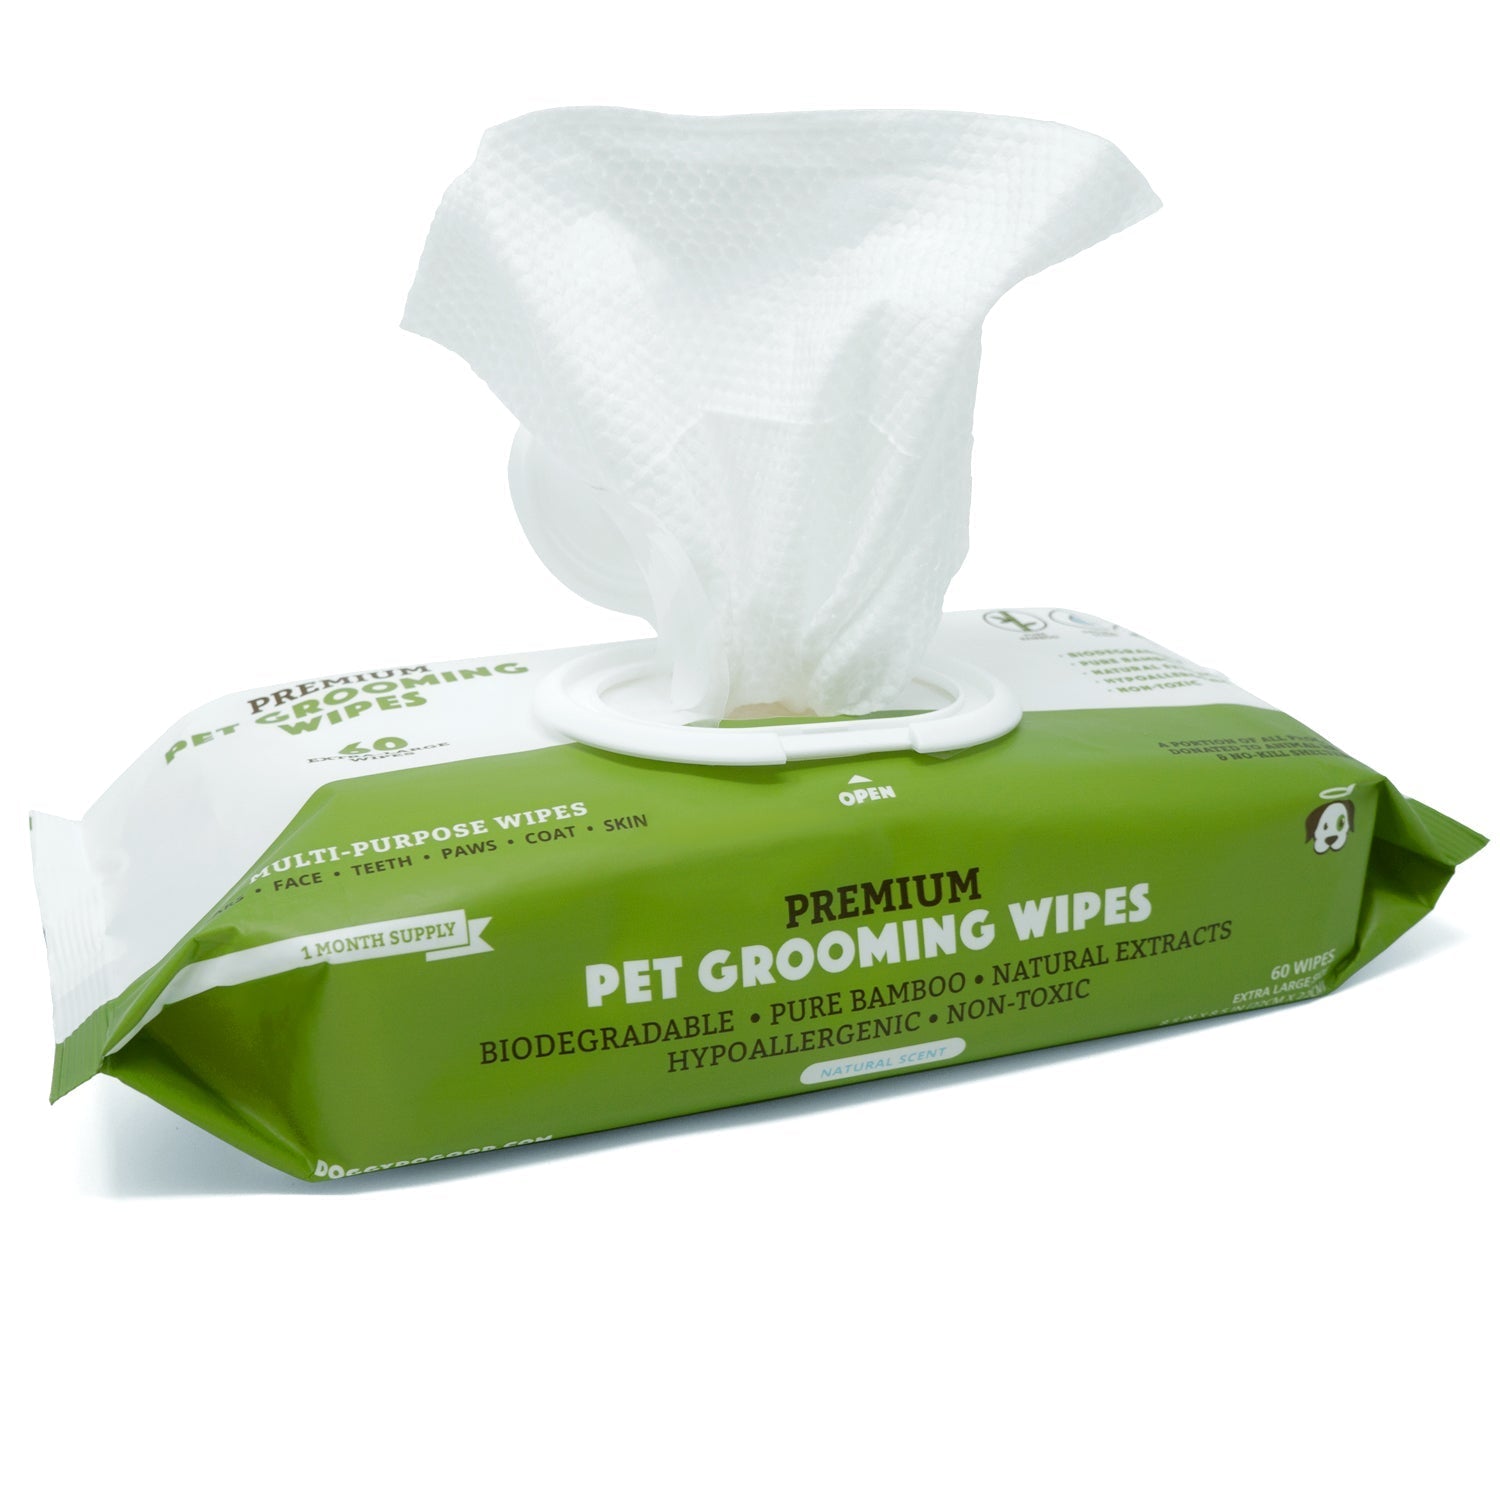 Biodegradable Grooming Wipes - 60 Wipes